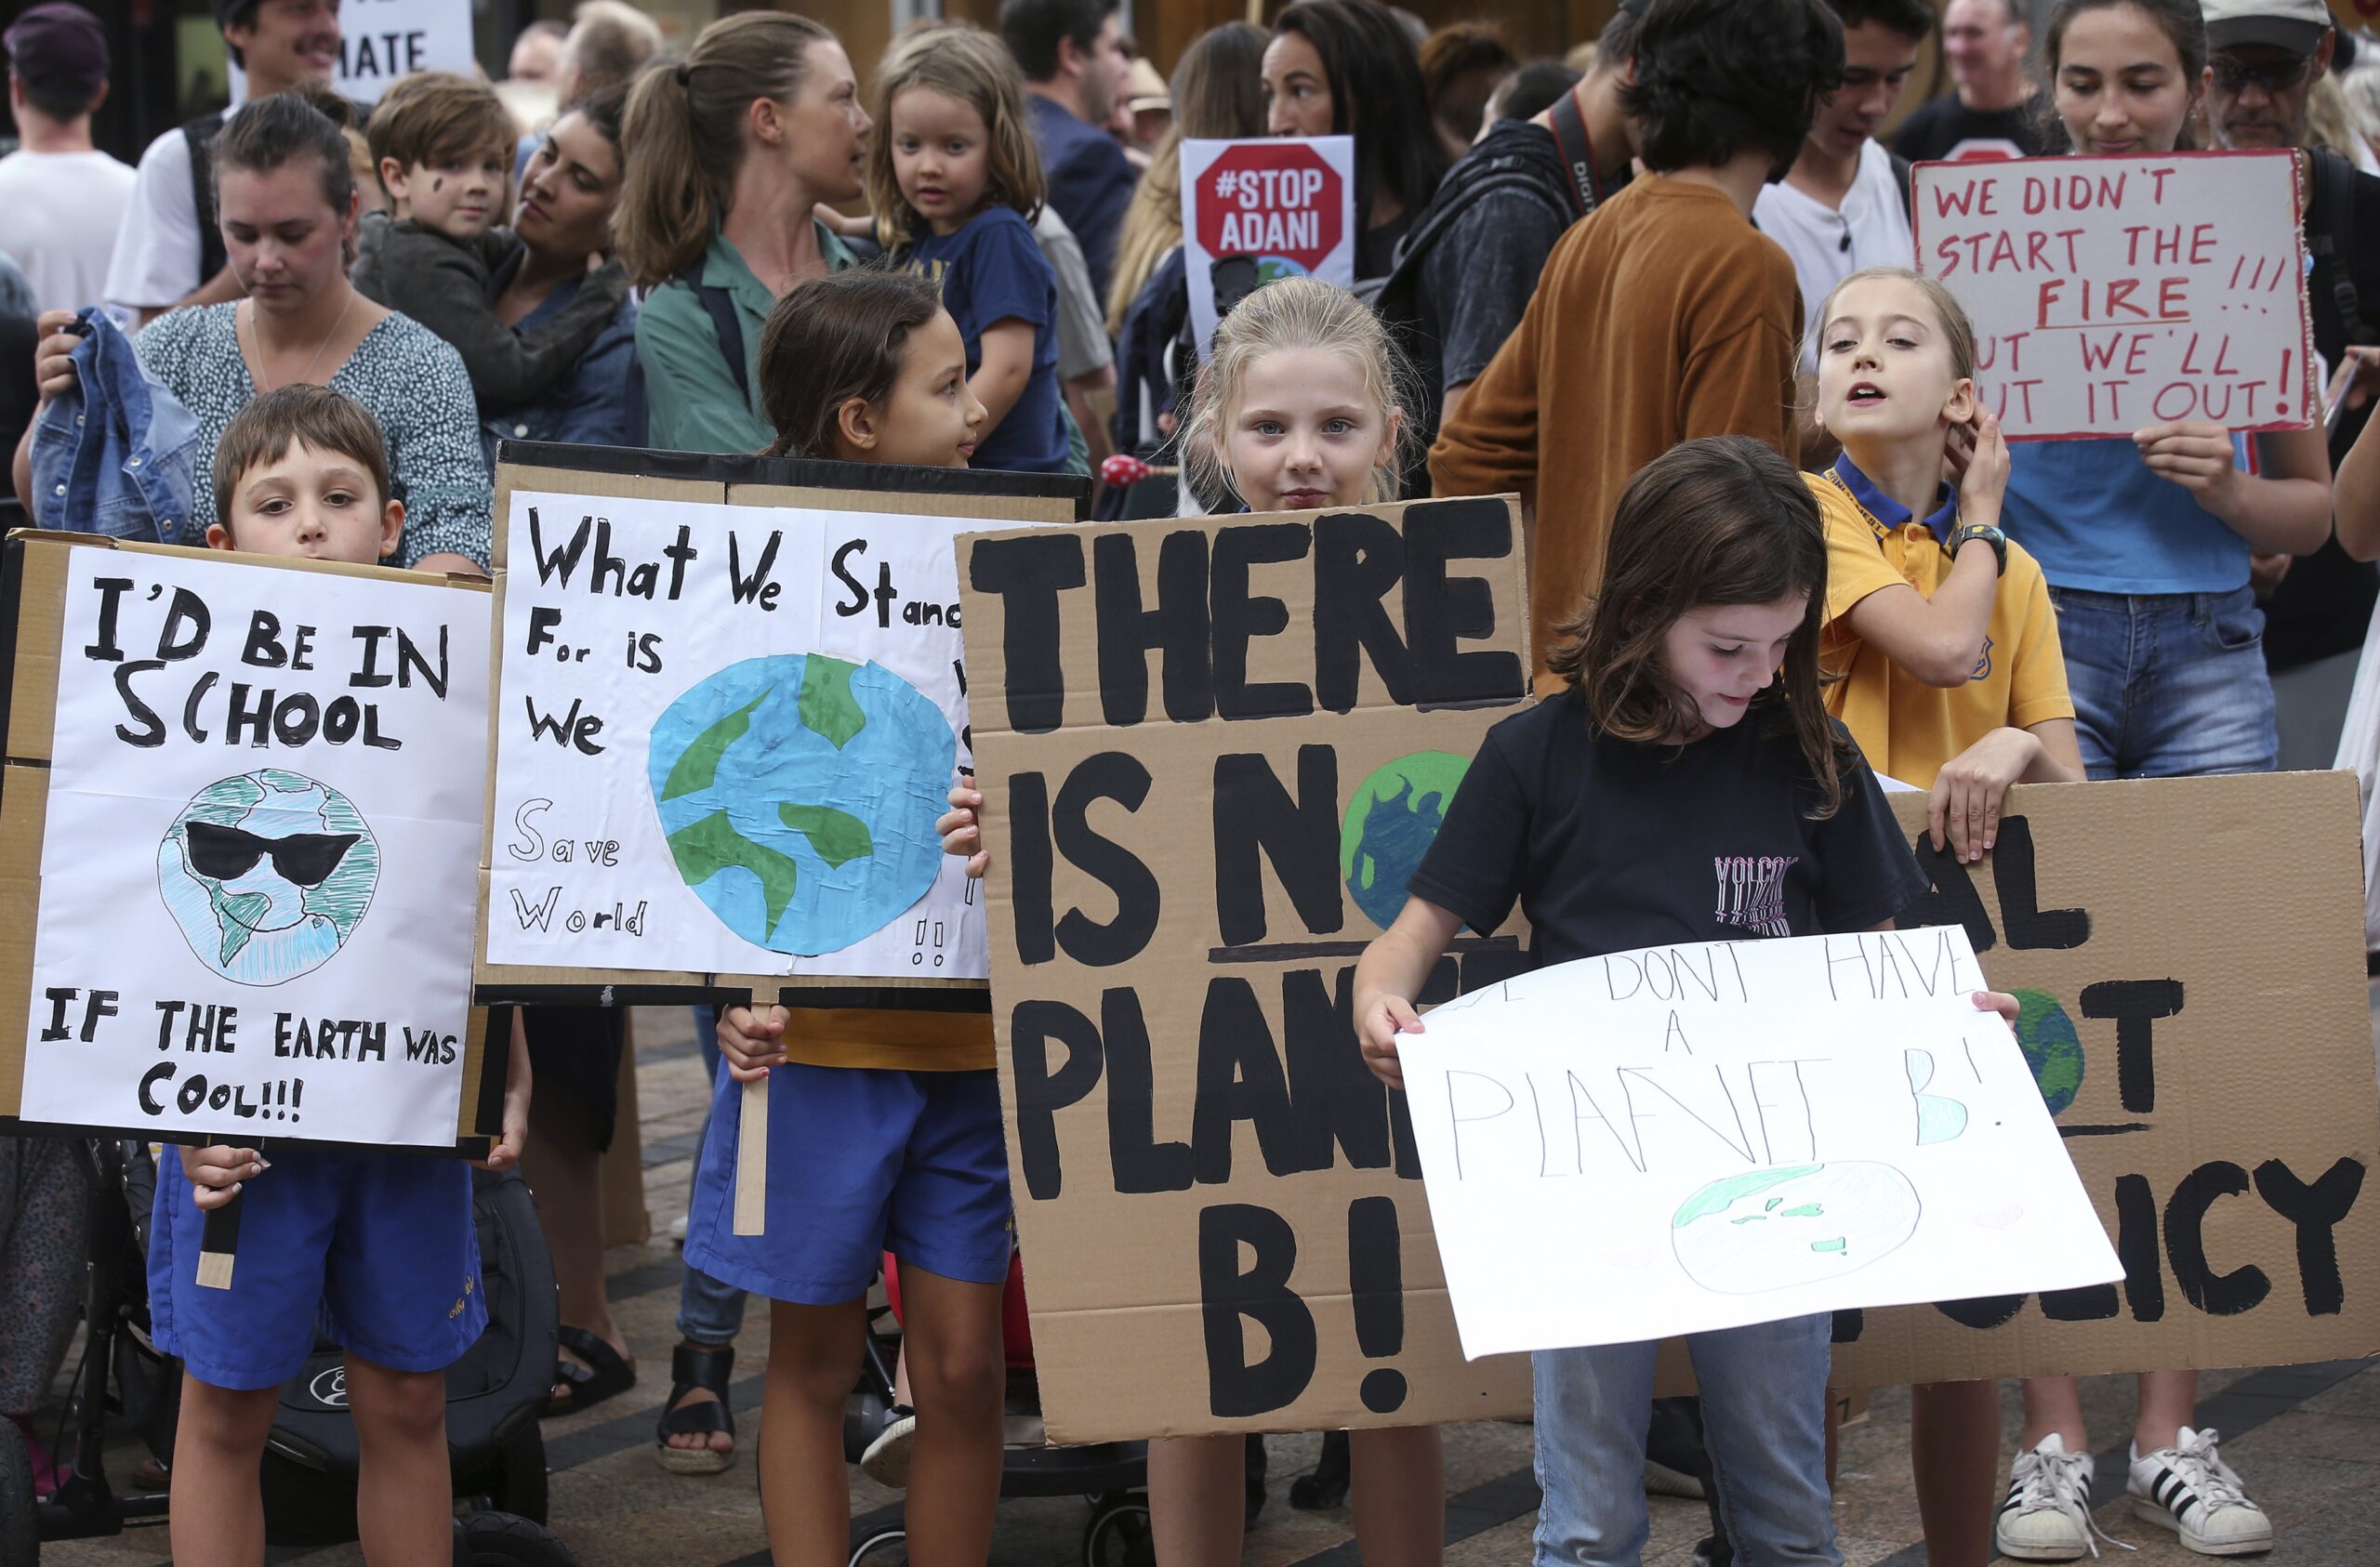 Children at climate change protest